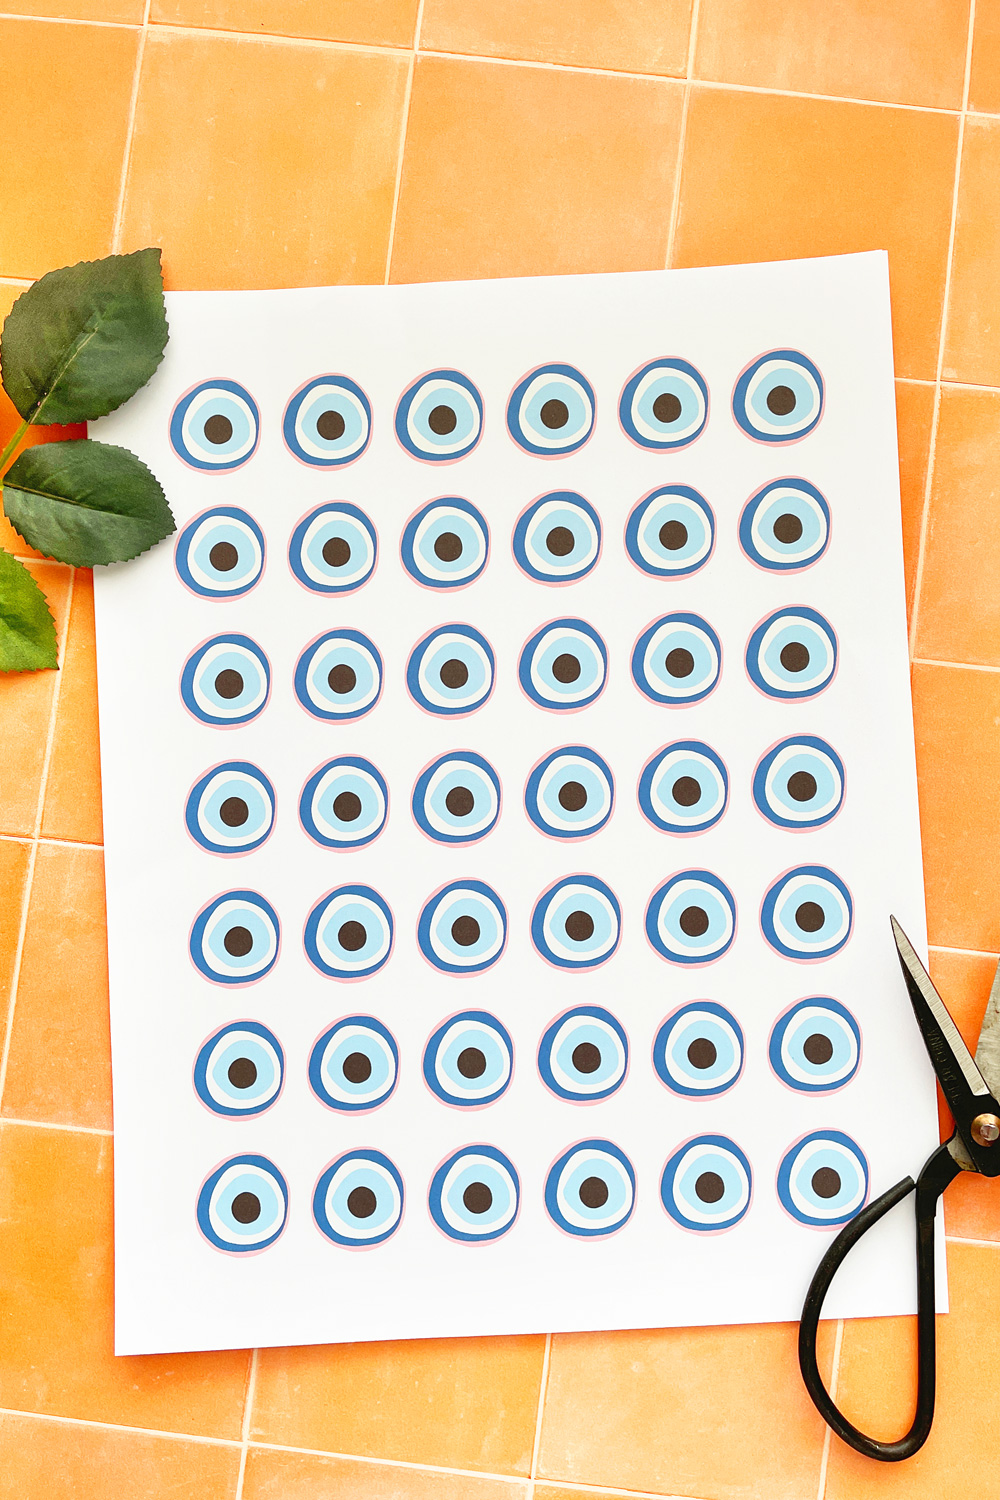 DIY Evil Eye Stickers - Print and Cut The Evil Eye Images on Sticker Paper